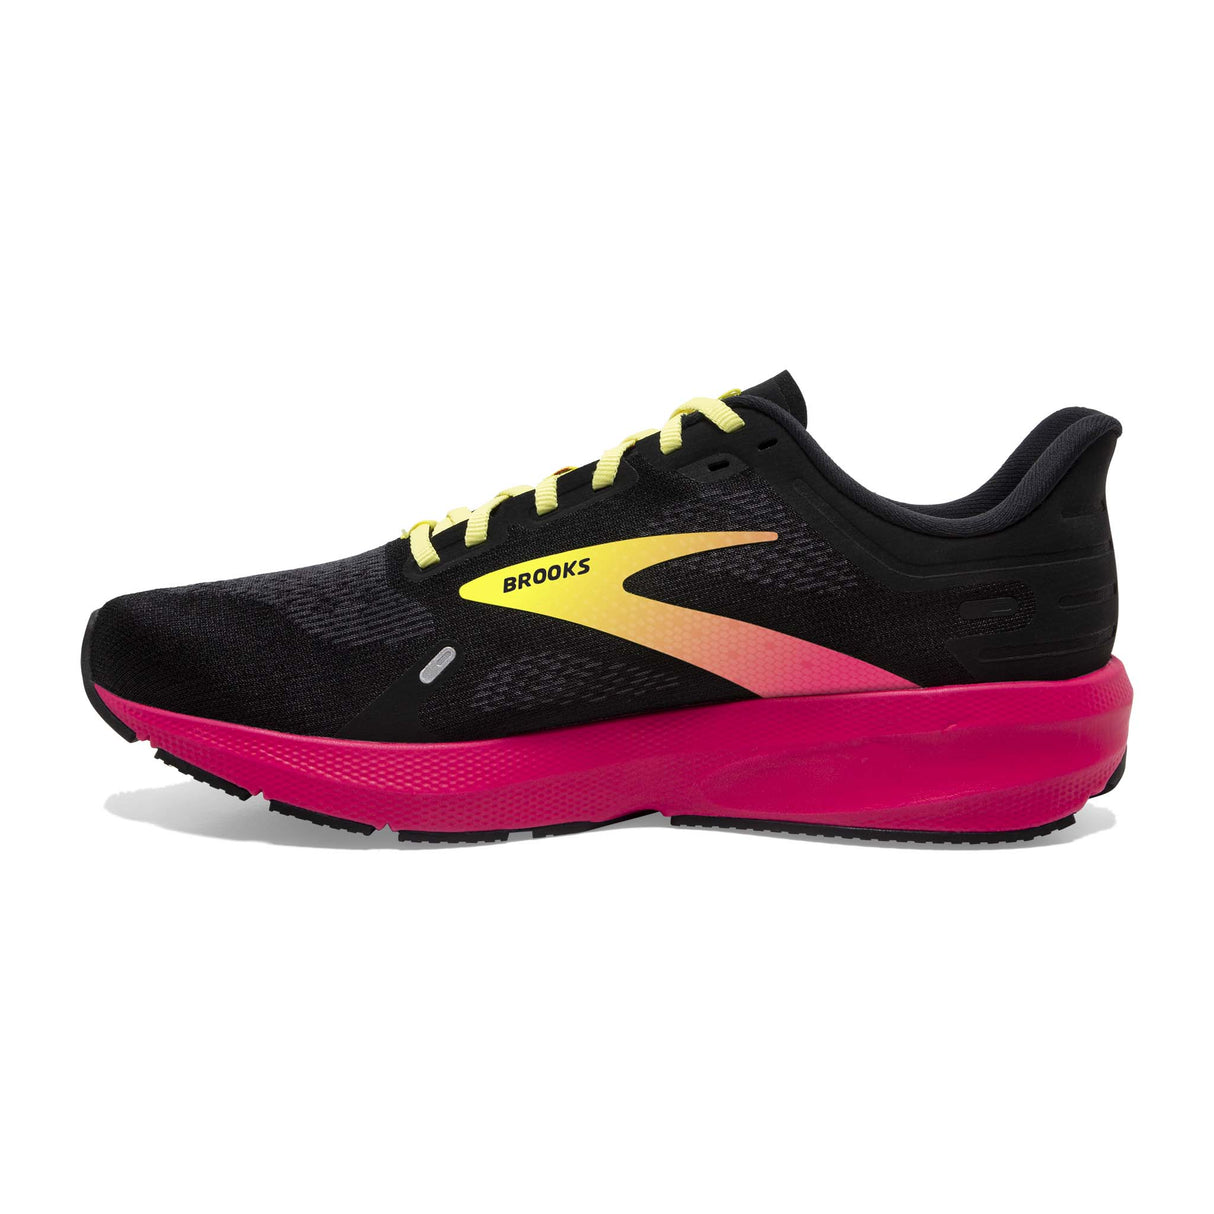 Brooks Launch 9 running homme lateral- black pink yellow